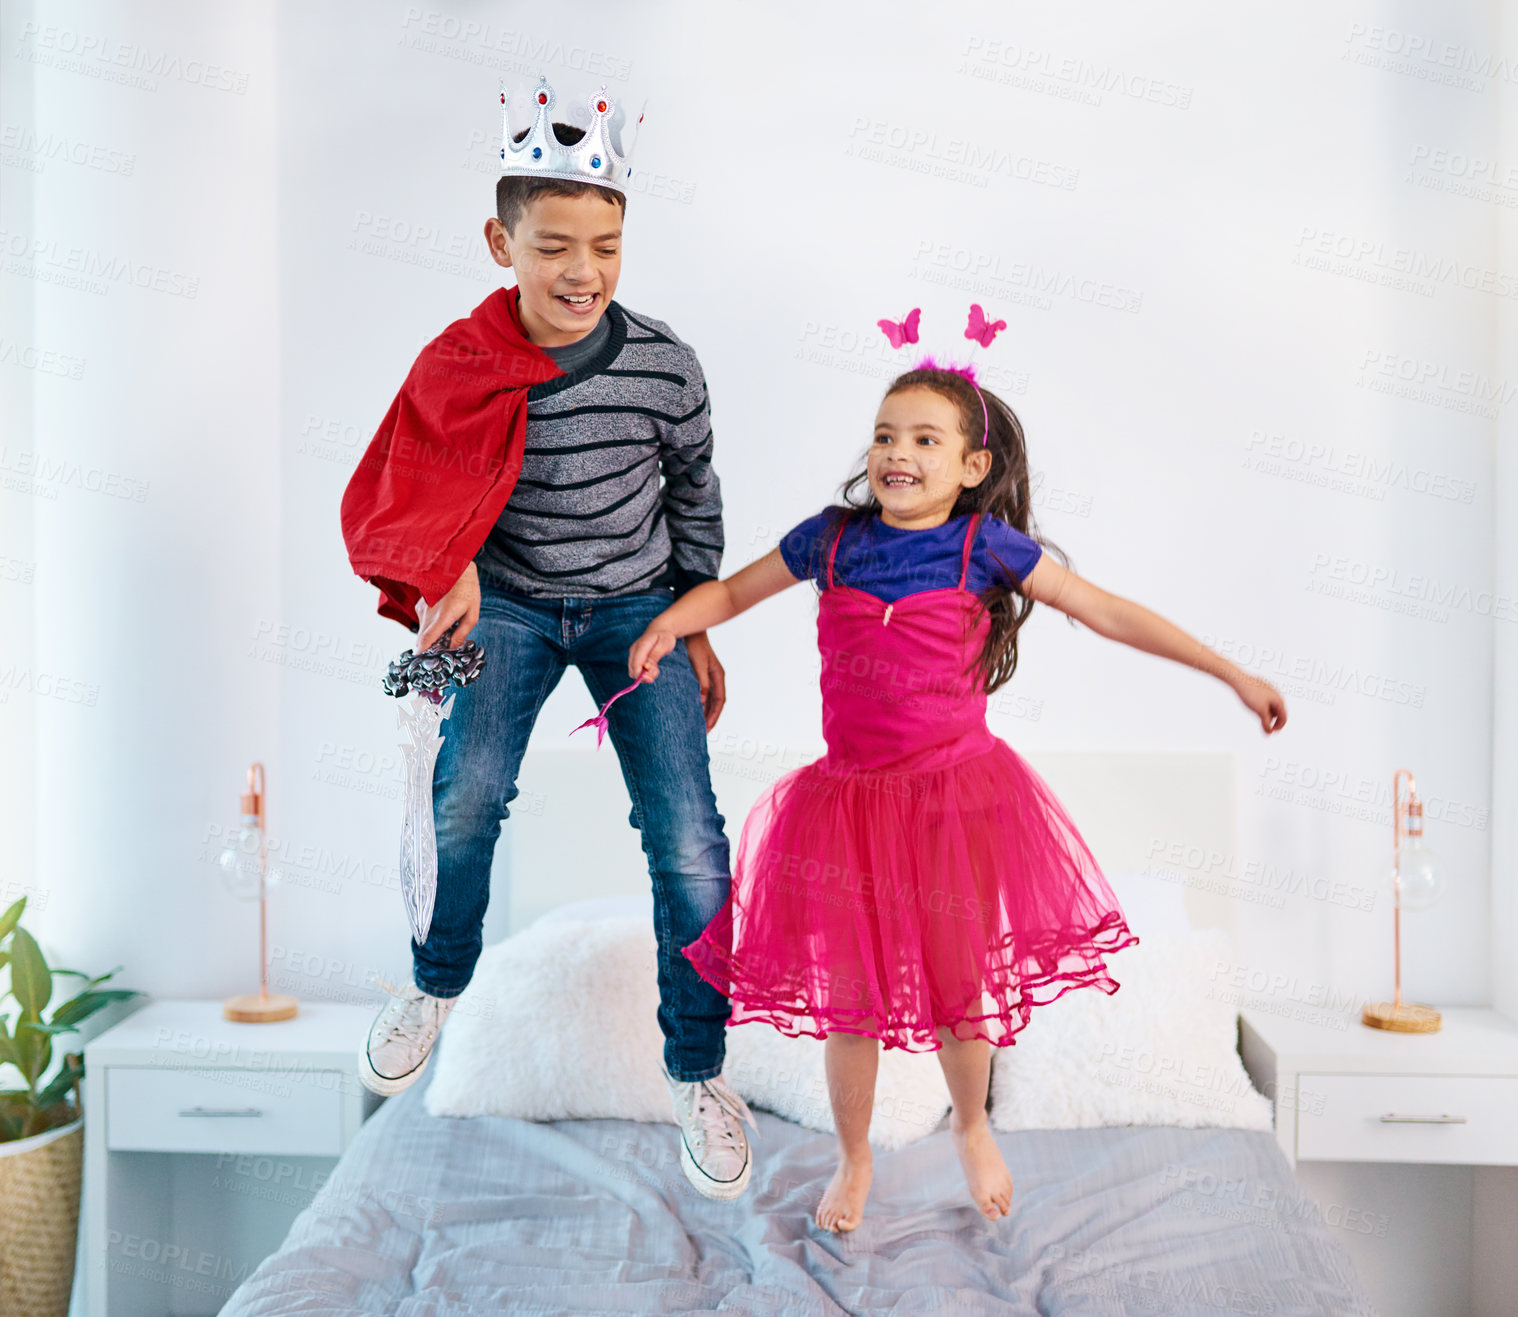 Buy stock photo Shot of two young children dressed up as superheroes jumping on a bed at home